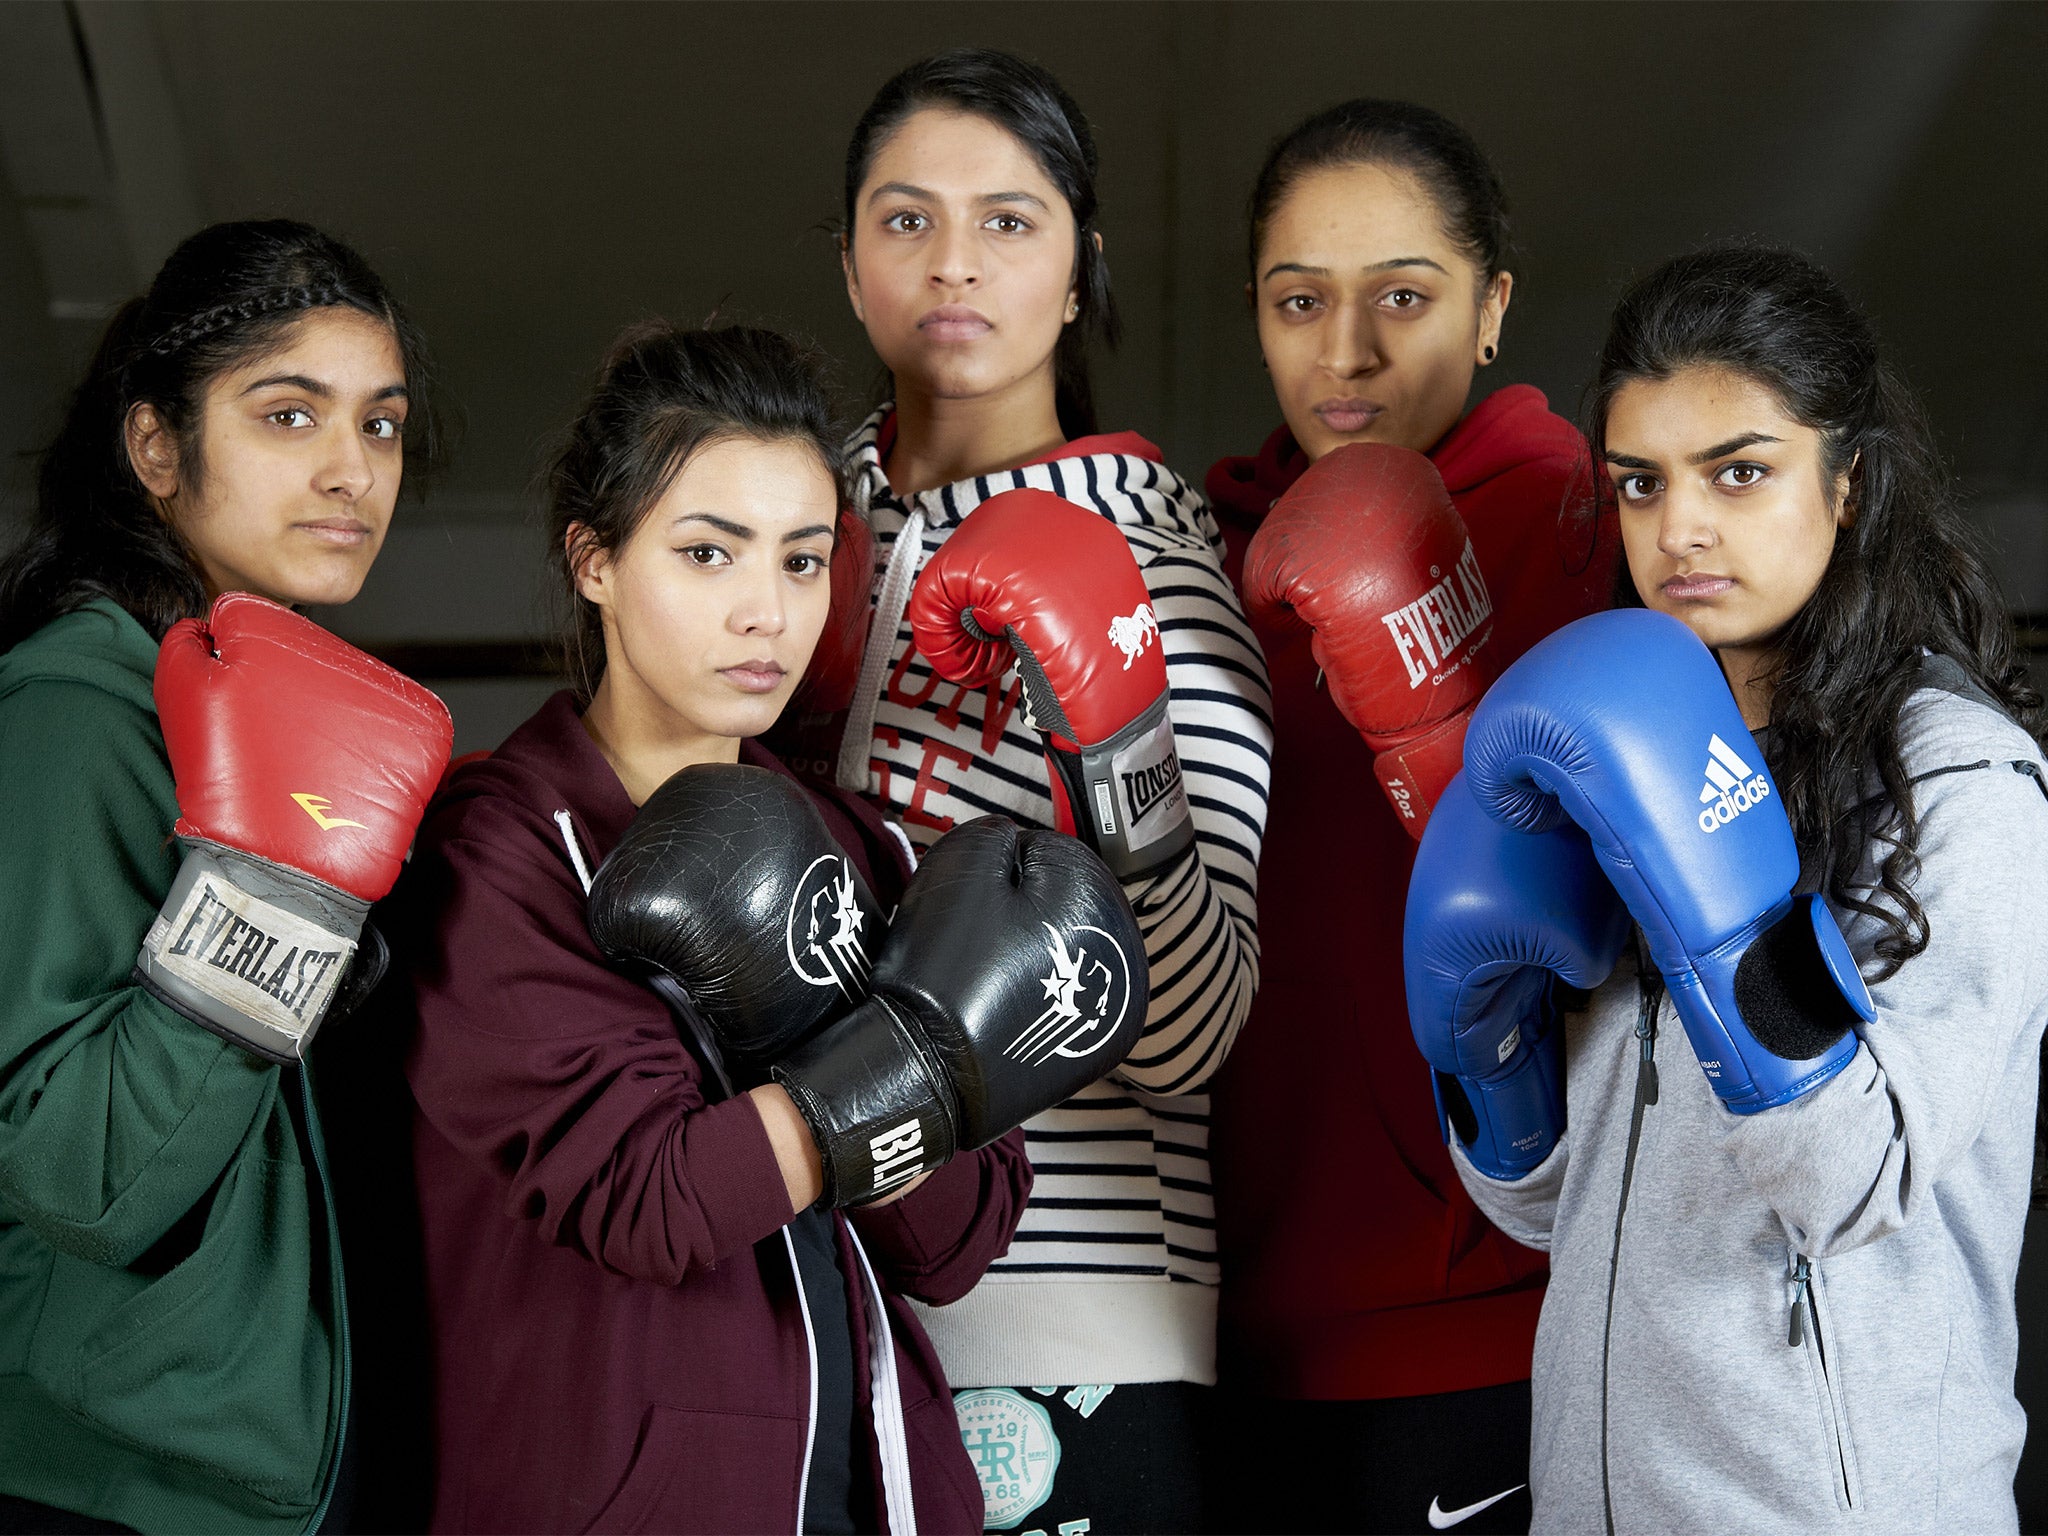 Pakistani women come out fighting A hard-hitting play focuses on female Muslim boxers The Independent The Independent pic